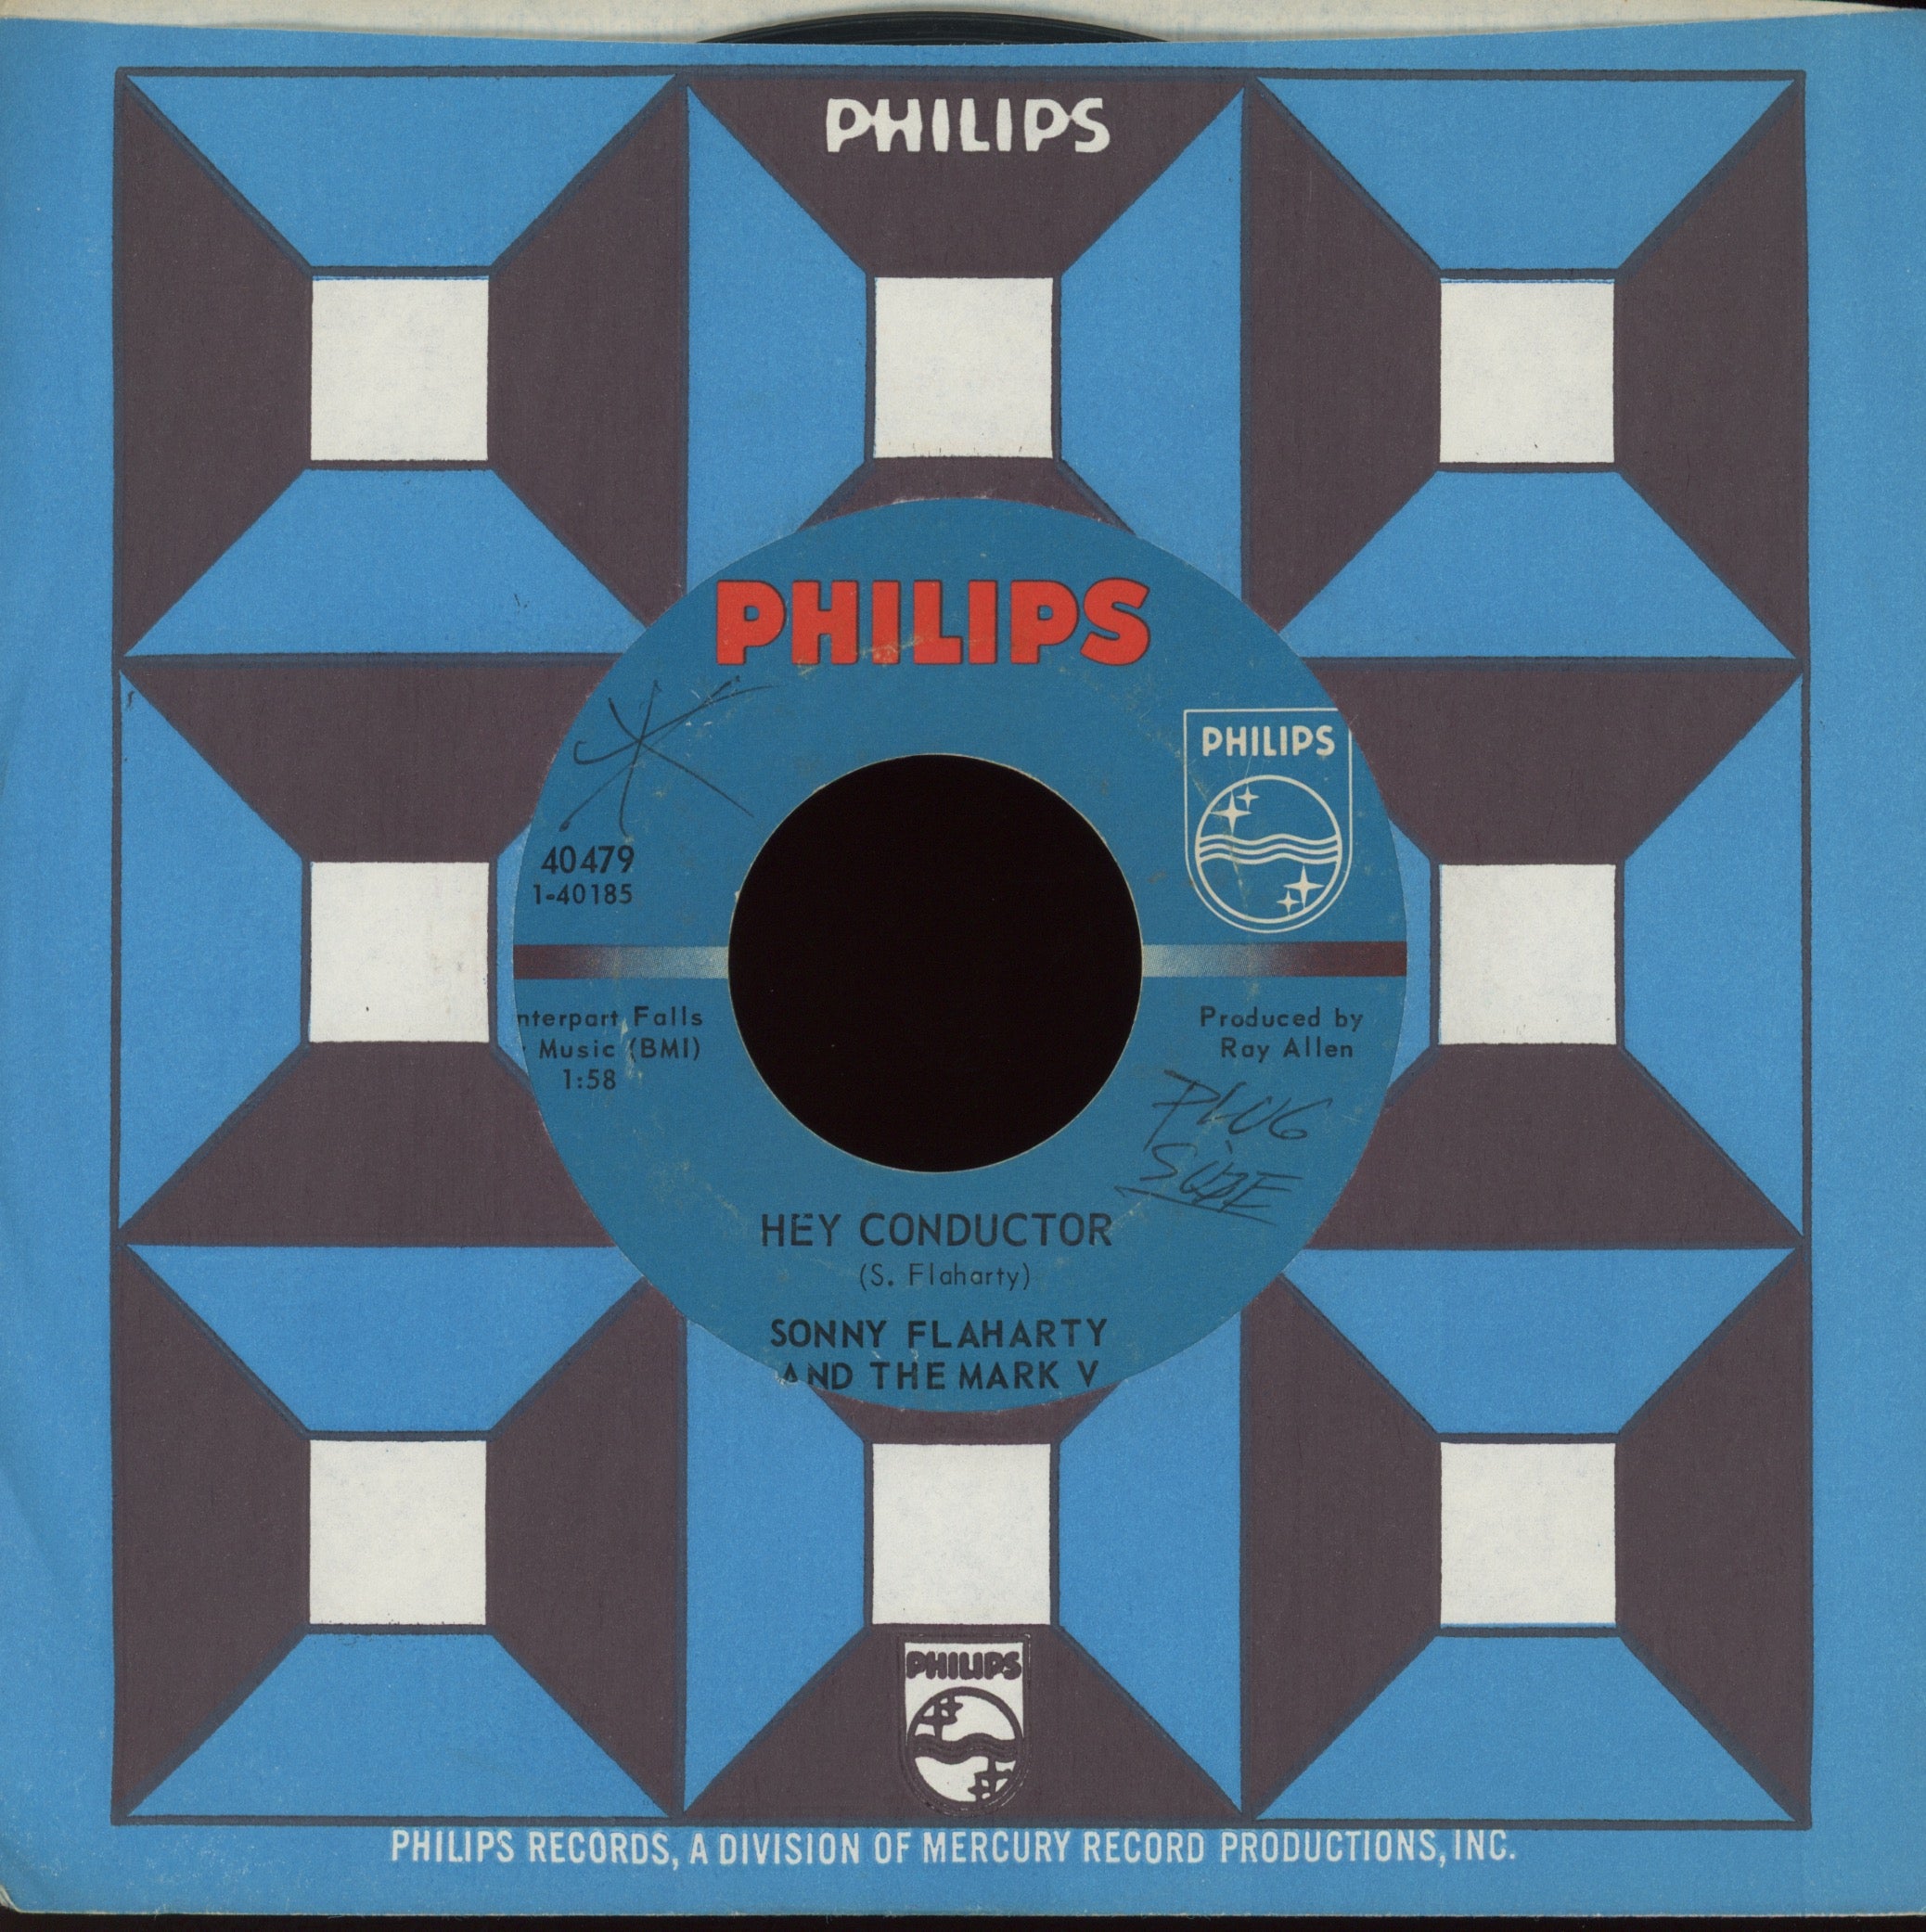 Sonny Flaharty & The Mark V - Hey Conductor on Philips Garage Fuzz 45